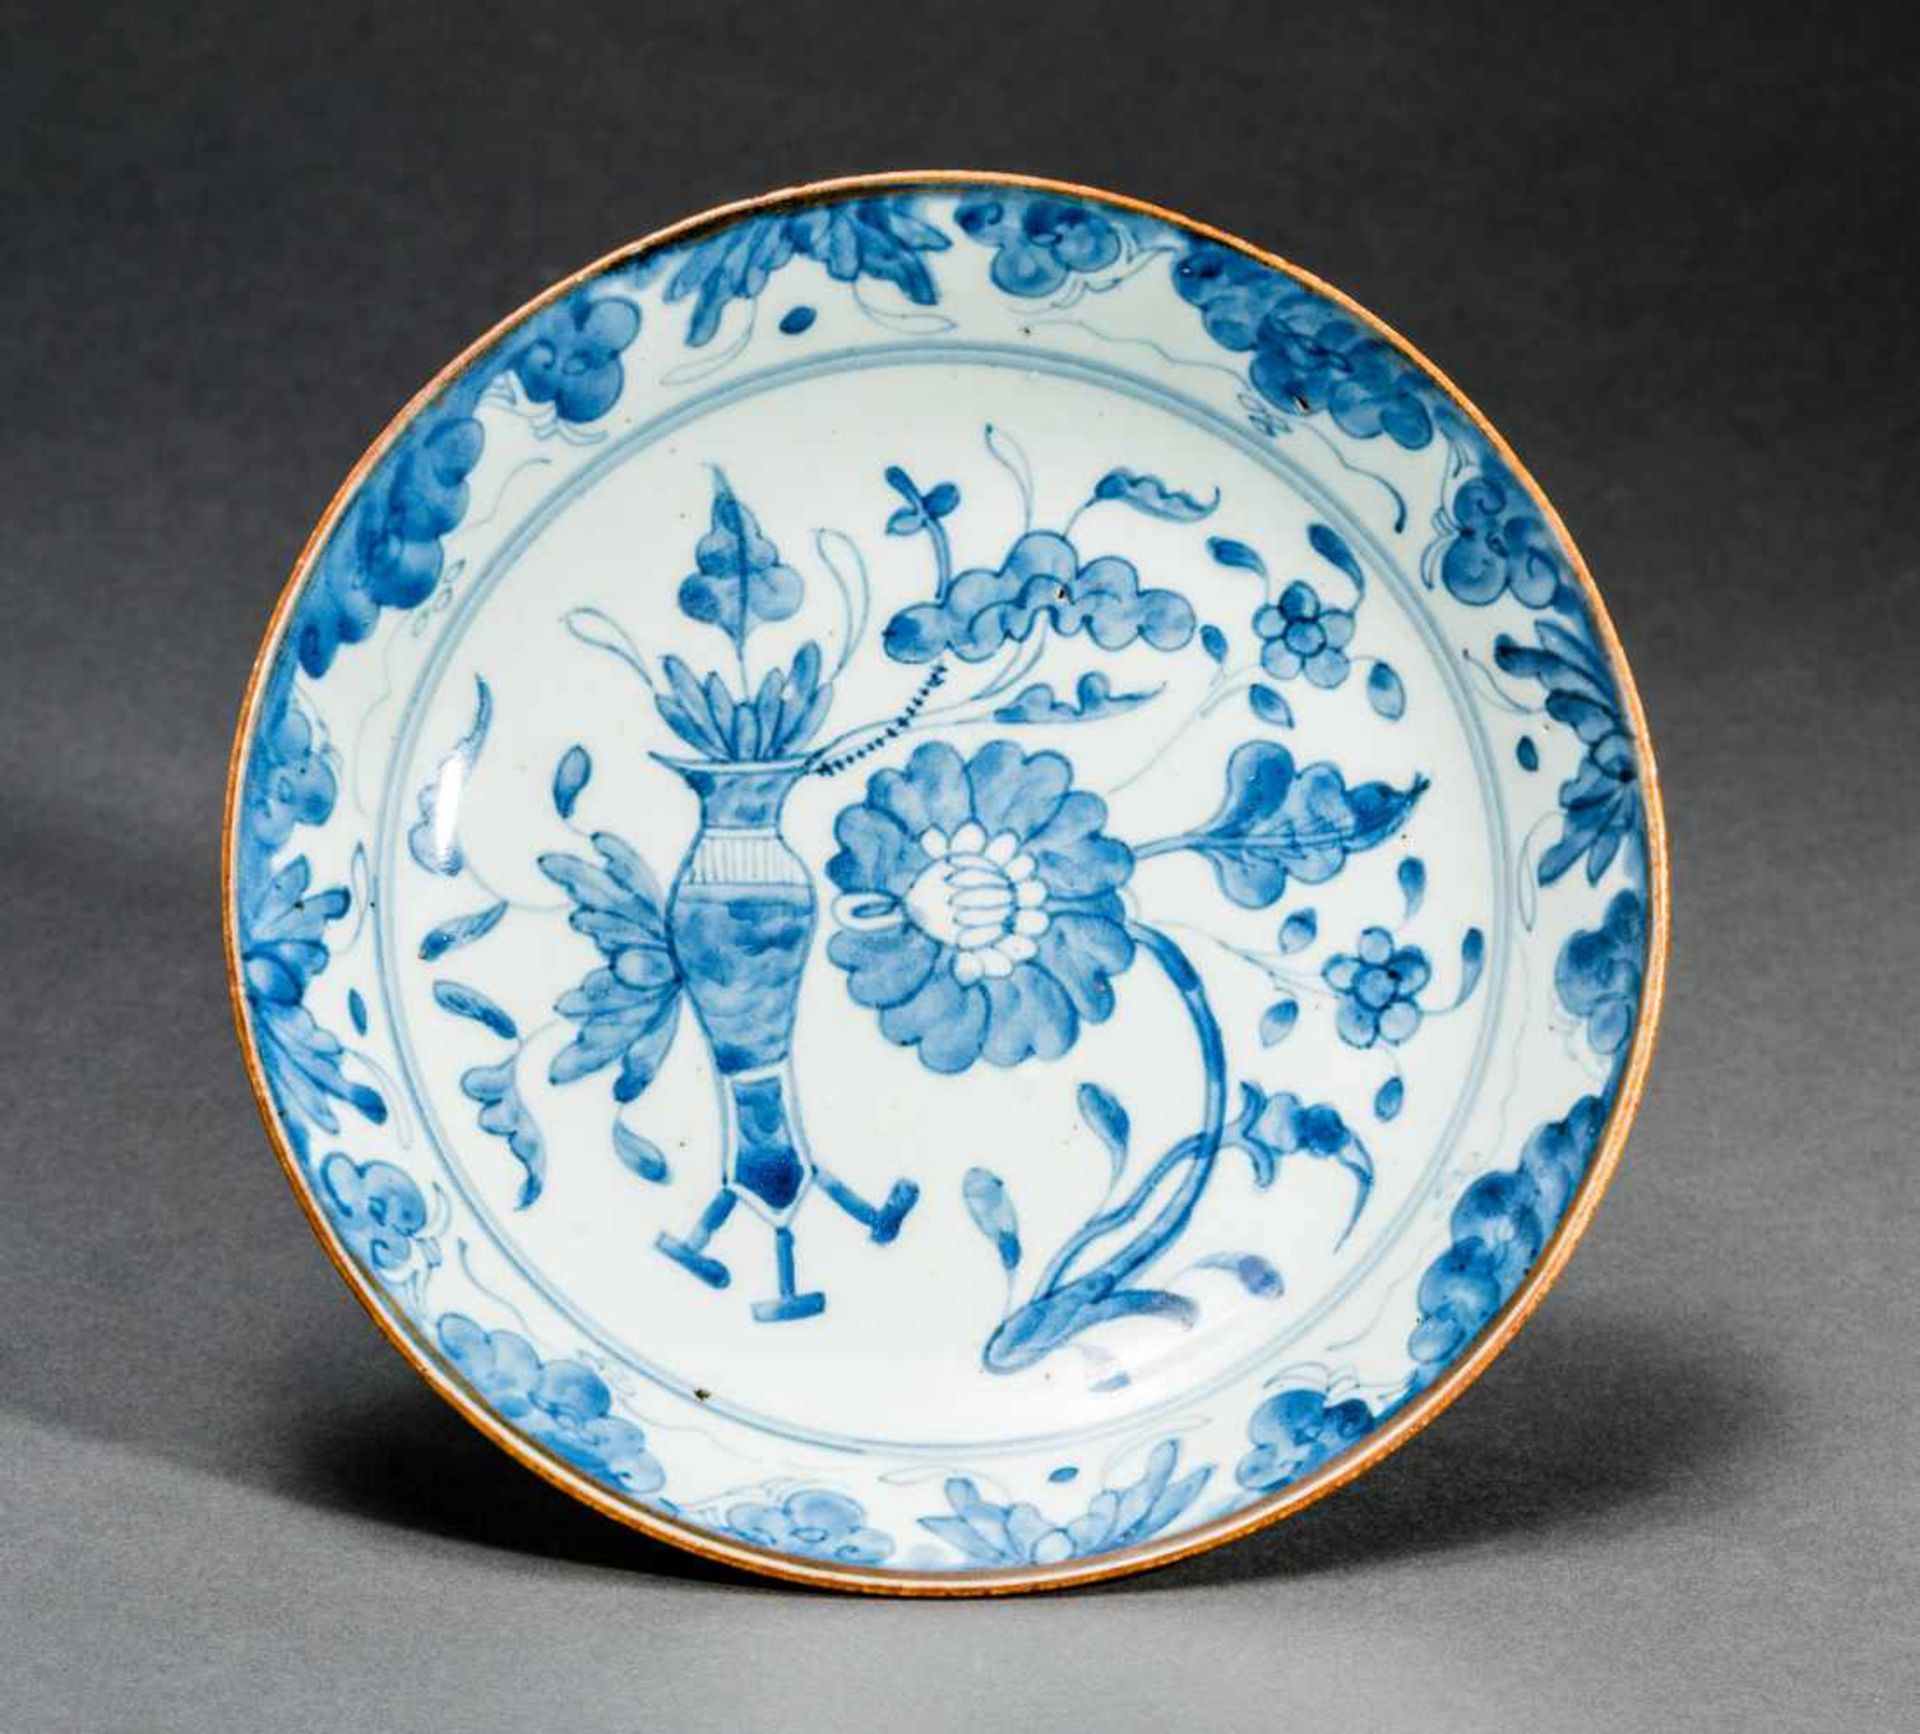 A BLUE AND WHITE PORCELAIN PLATE WITH BLOSSOMSPorcelain with cobalt-blue paintingChina, Qing dynasty